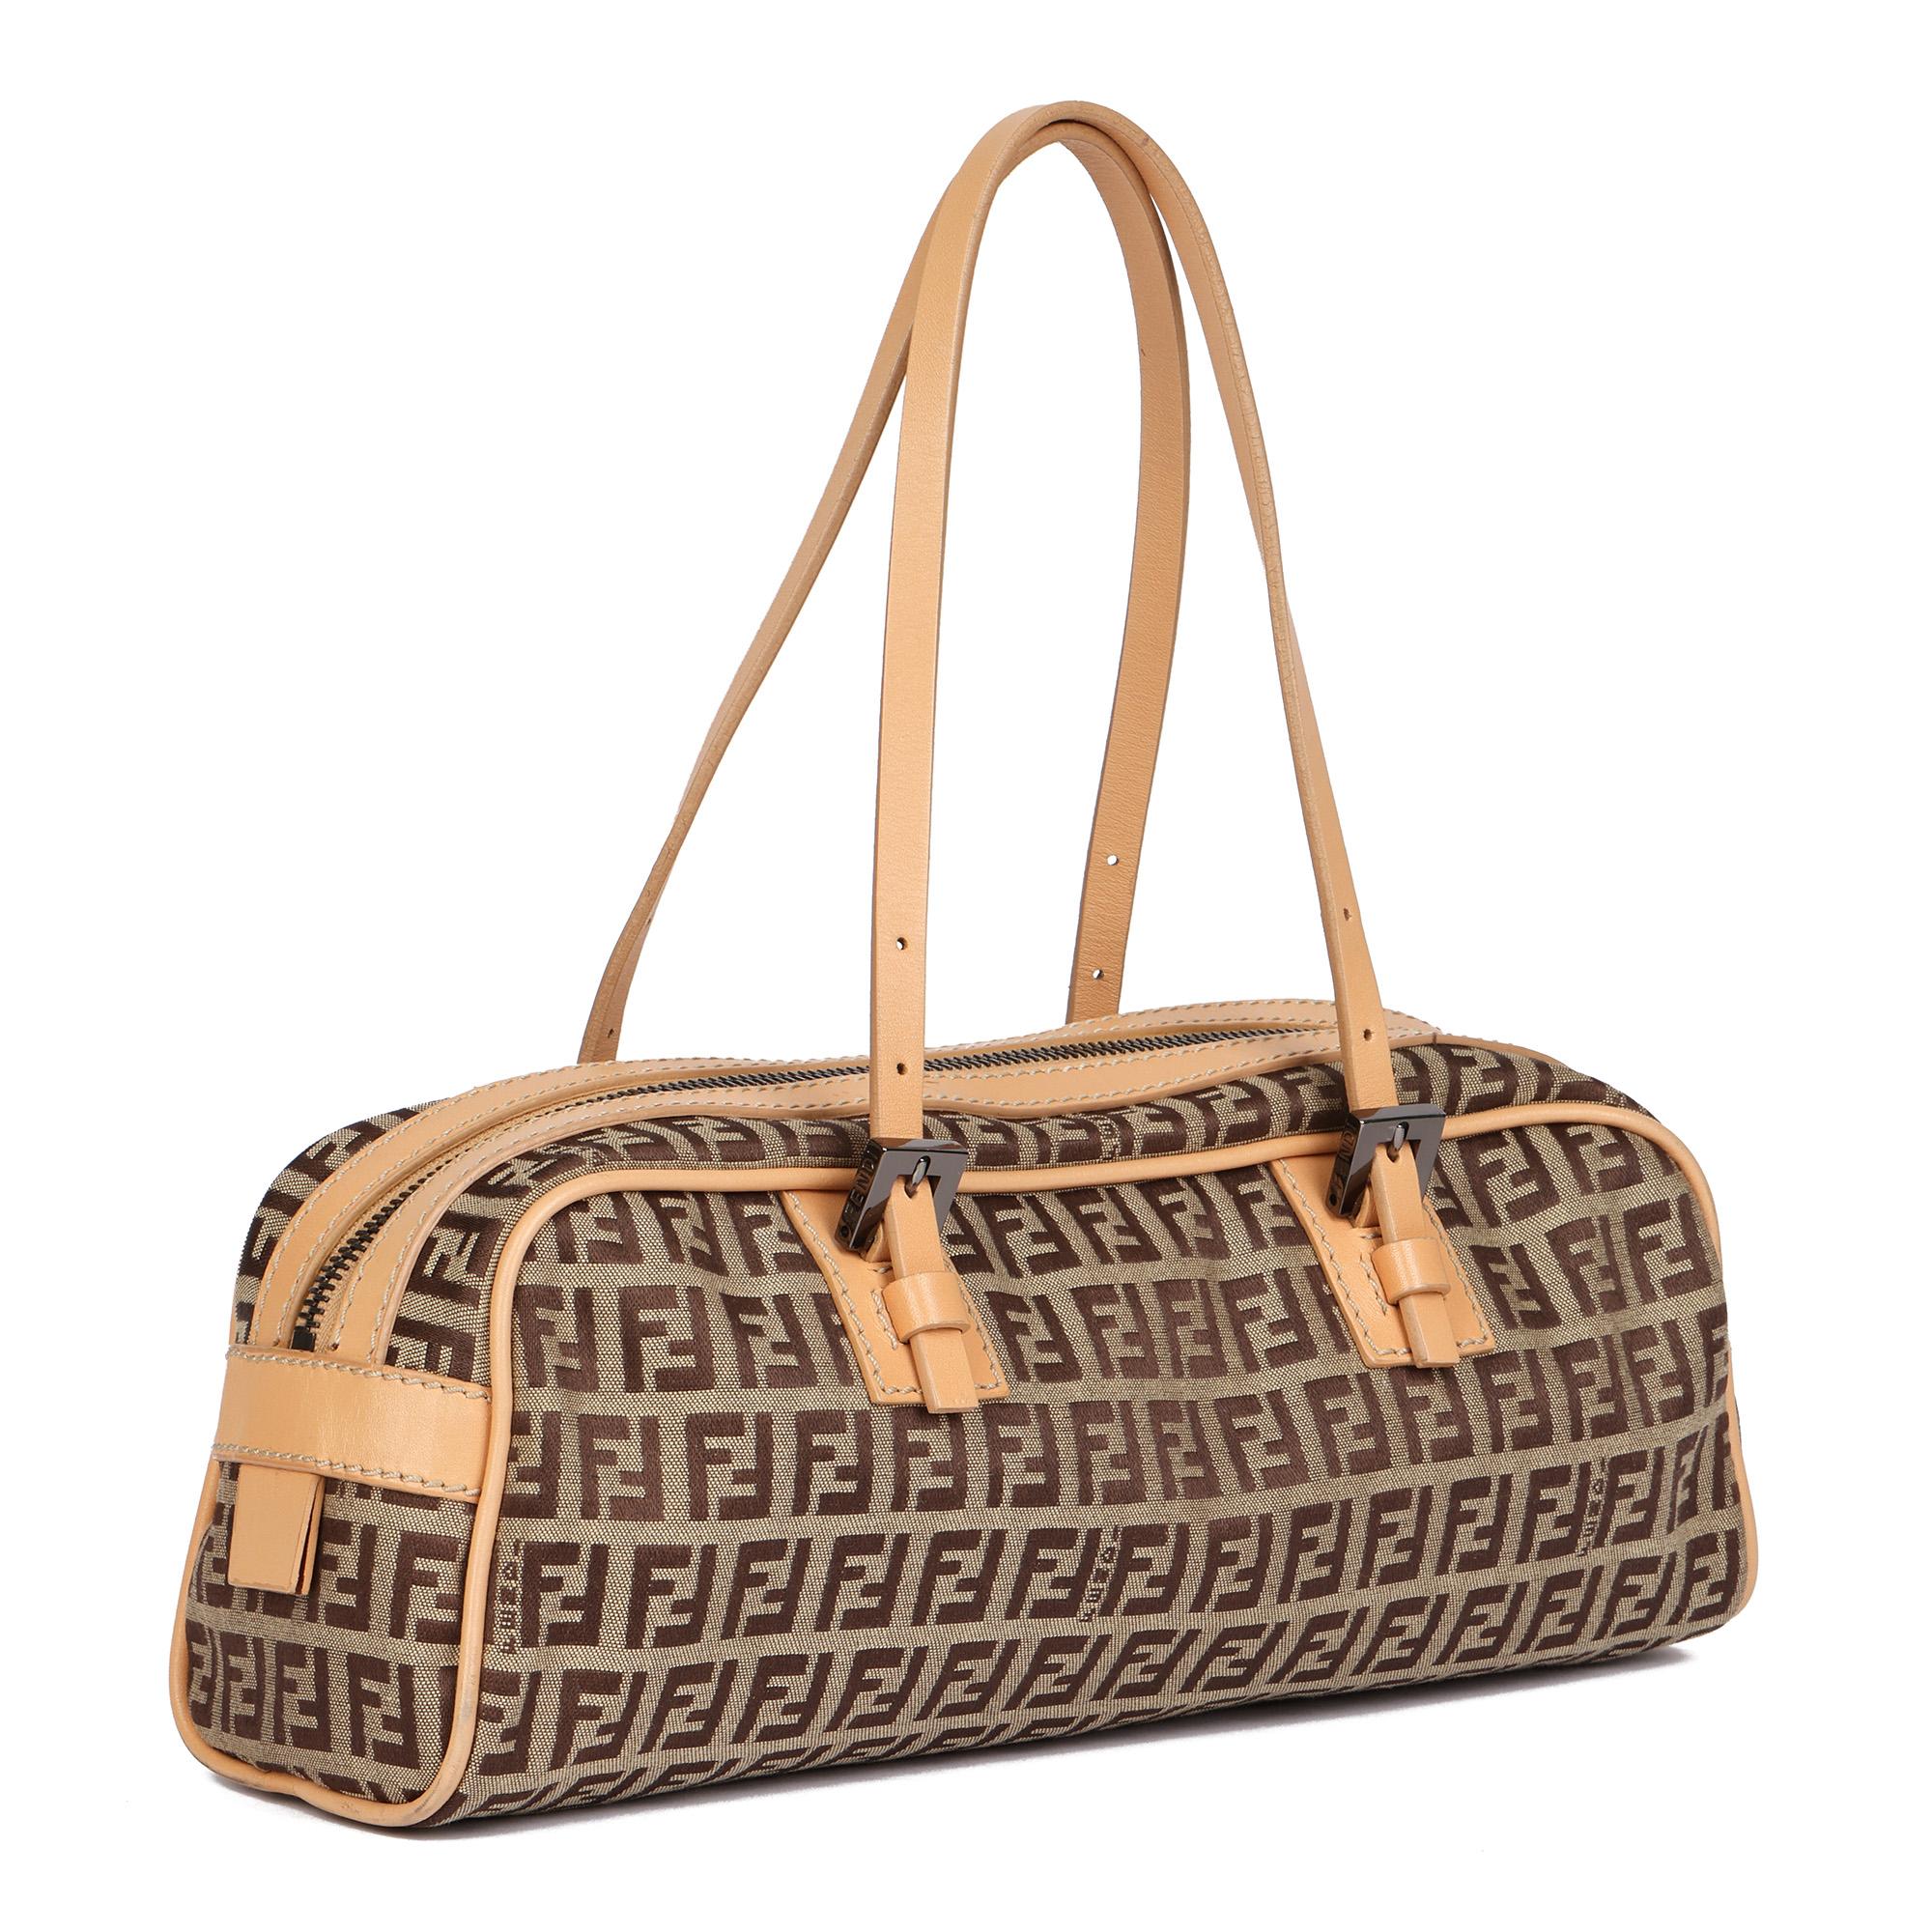 FENDI
Beige Zucca Canvas & Beige Calfskin Leather Zucchino Tote

Serial Number: 2119 8BL007 028
Age (Circa): 2000
Authenticity Details: Date Stamp (Made in Italy)
Gender: Ladies
Type: Tote

Colour: Beige
Hardware: Silver
Material(s): Canvas,